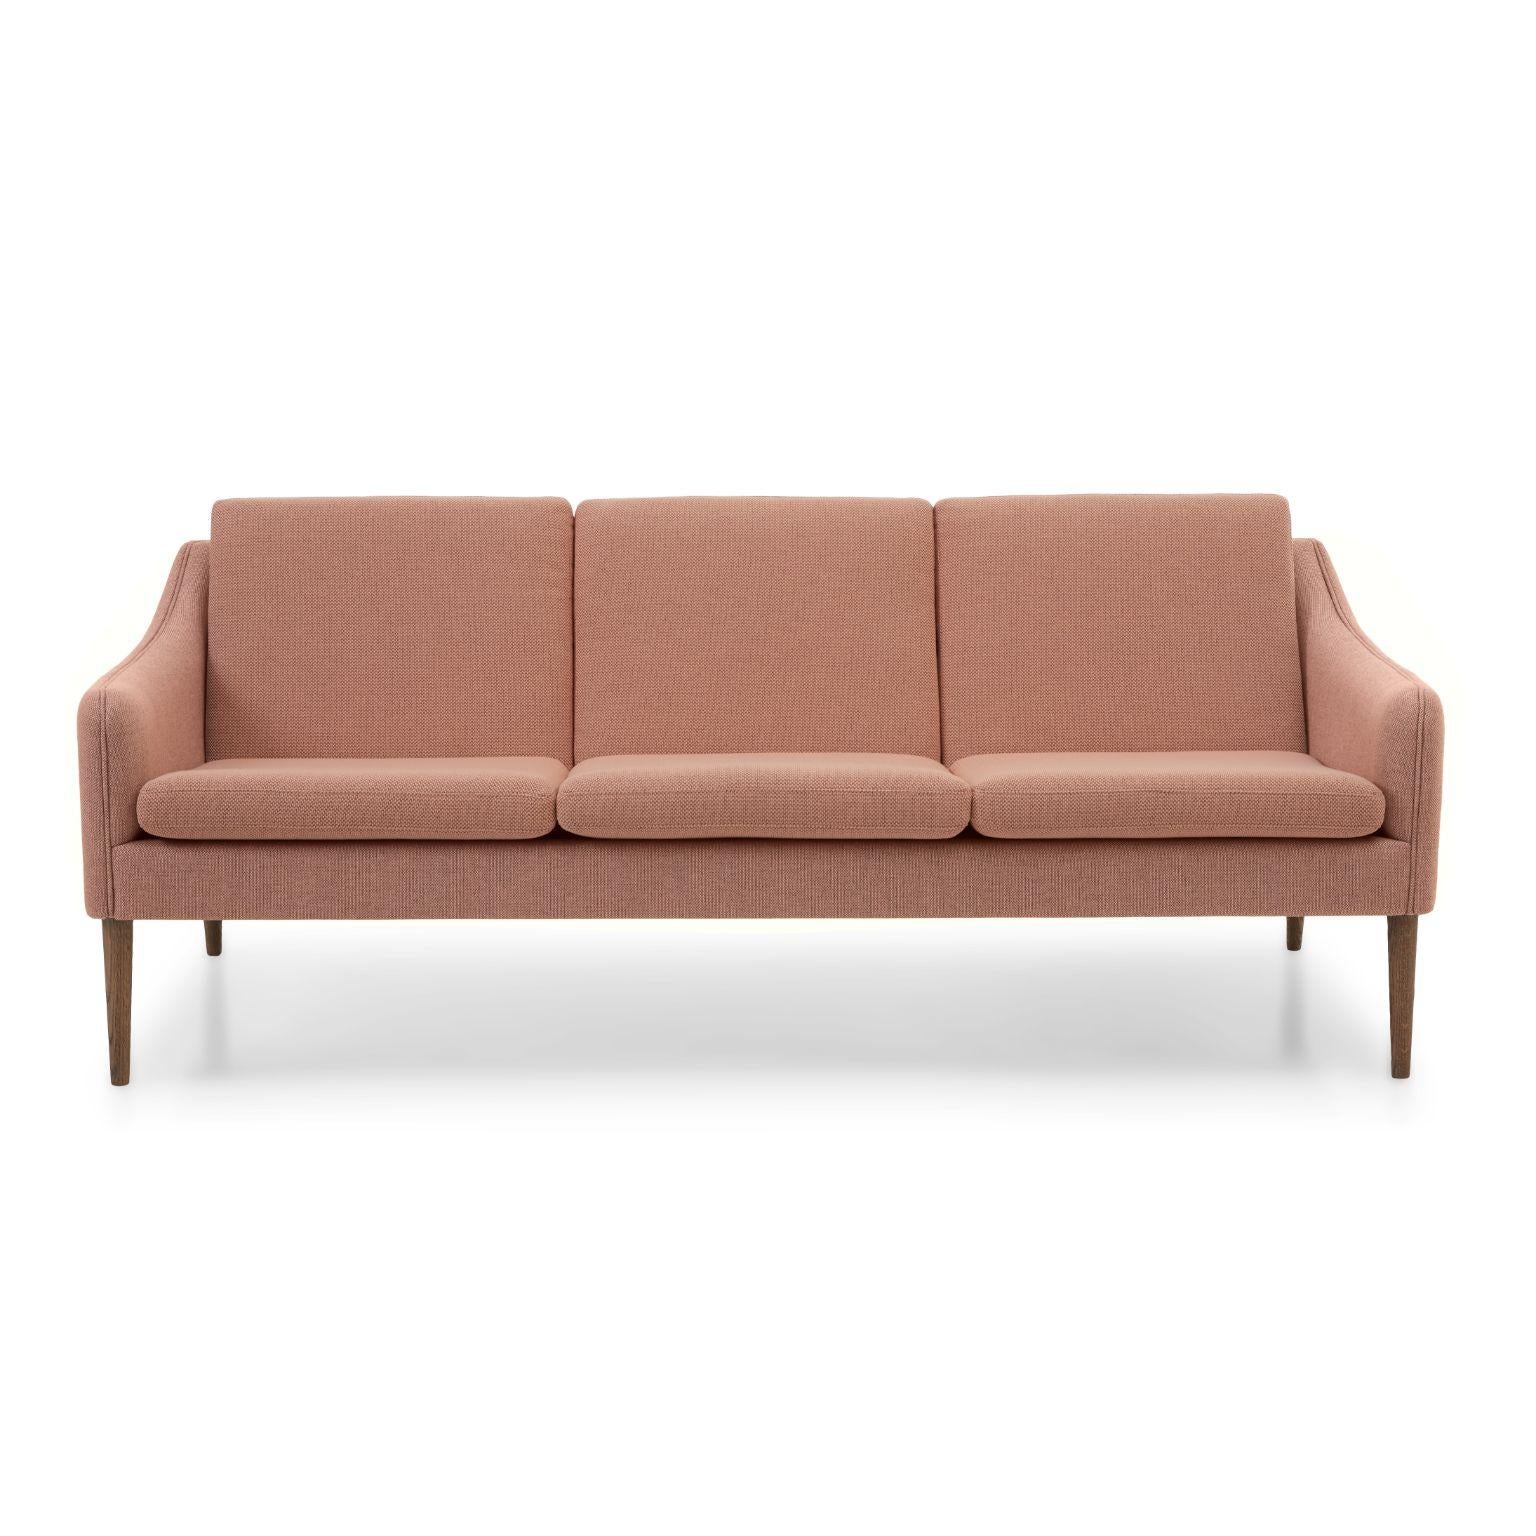 Mr Olsen 3 Seater Oak Fresh Peach by Warm Nordic
Dimensions: D201 x W79 x H 78/46 cm
Material: Textile upholstery, Foam, Spring system, Solid oiled oak legs, Solid smoked oak legs
Weight: 50 kg
Also available in different colours and finishes.